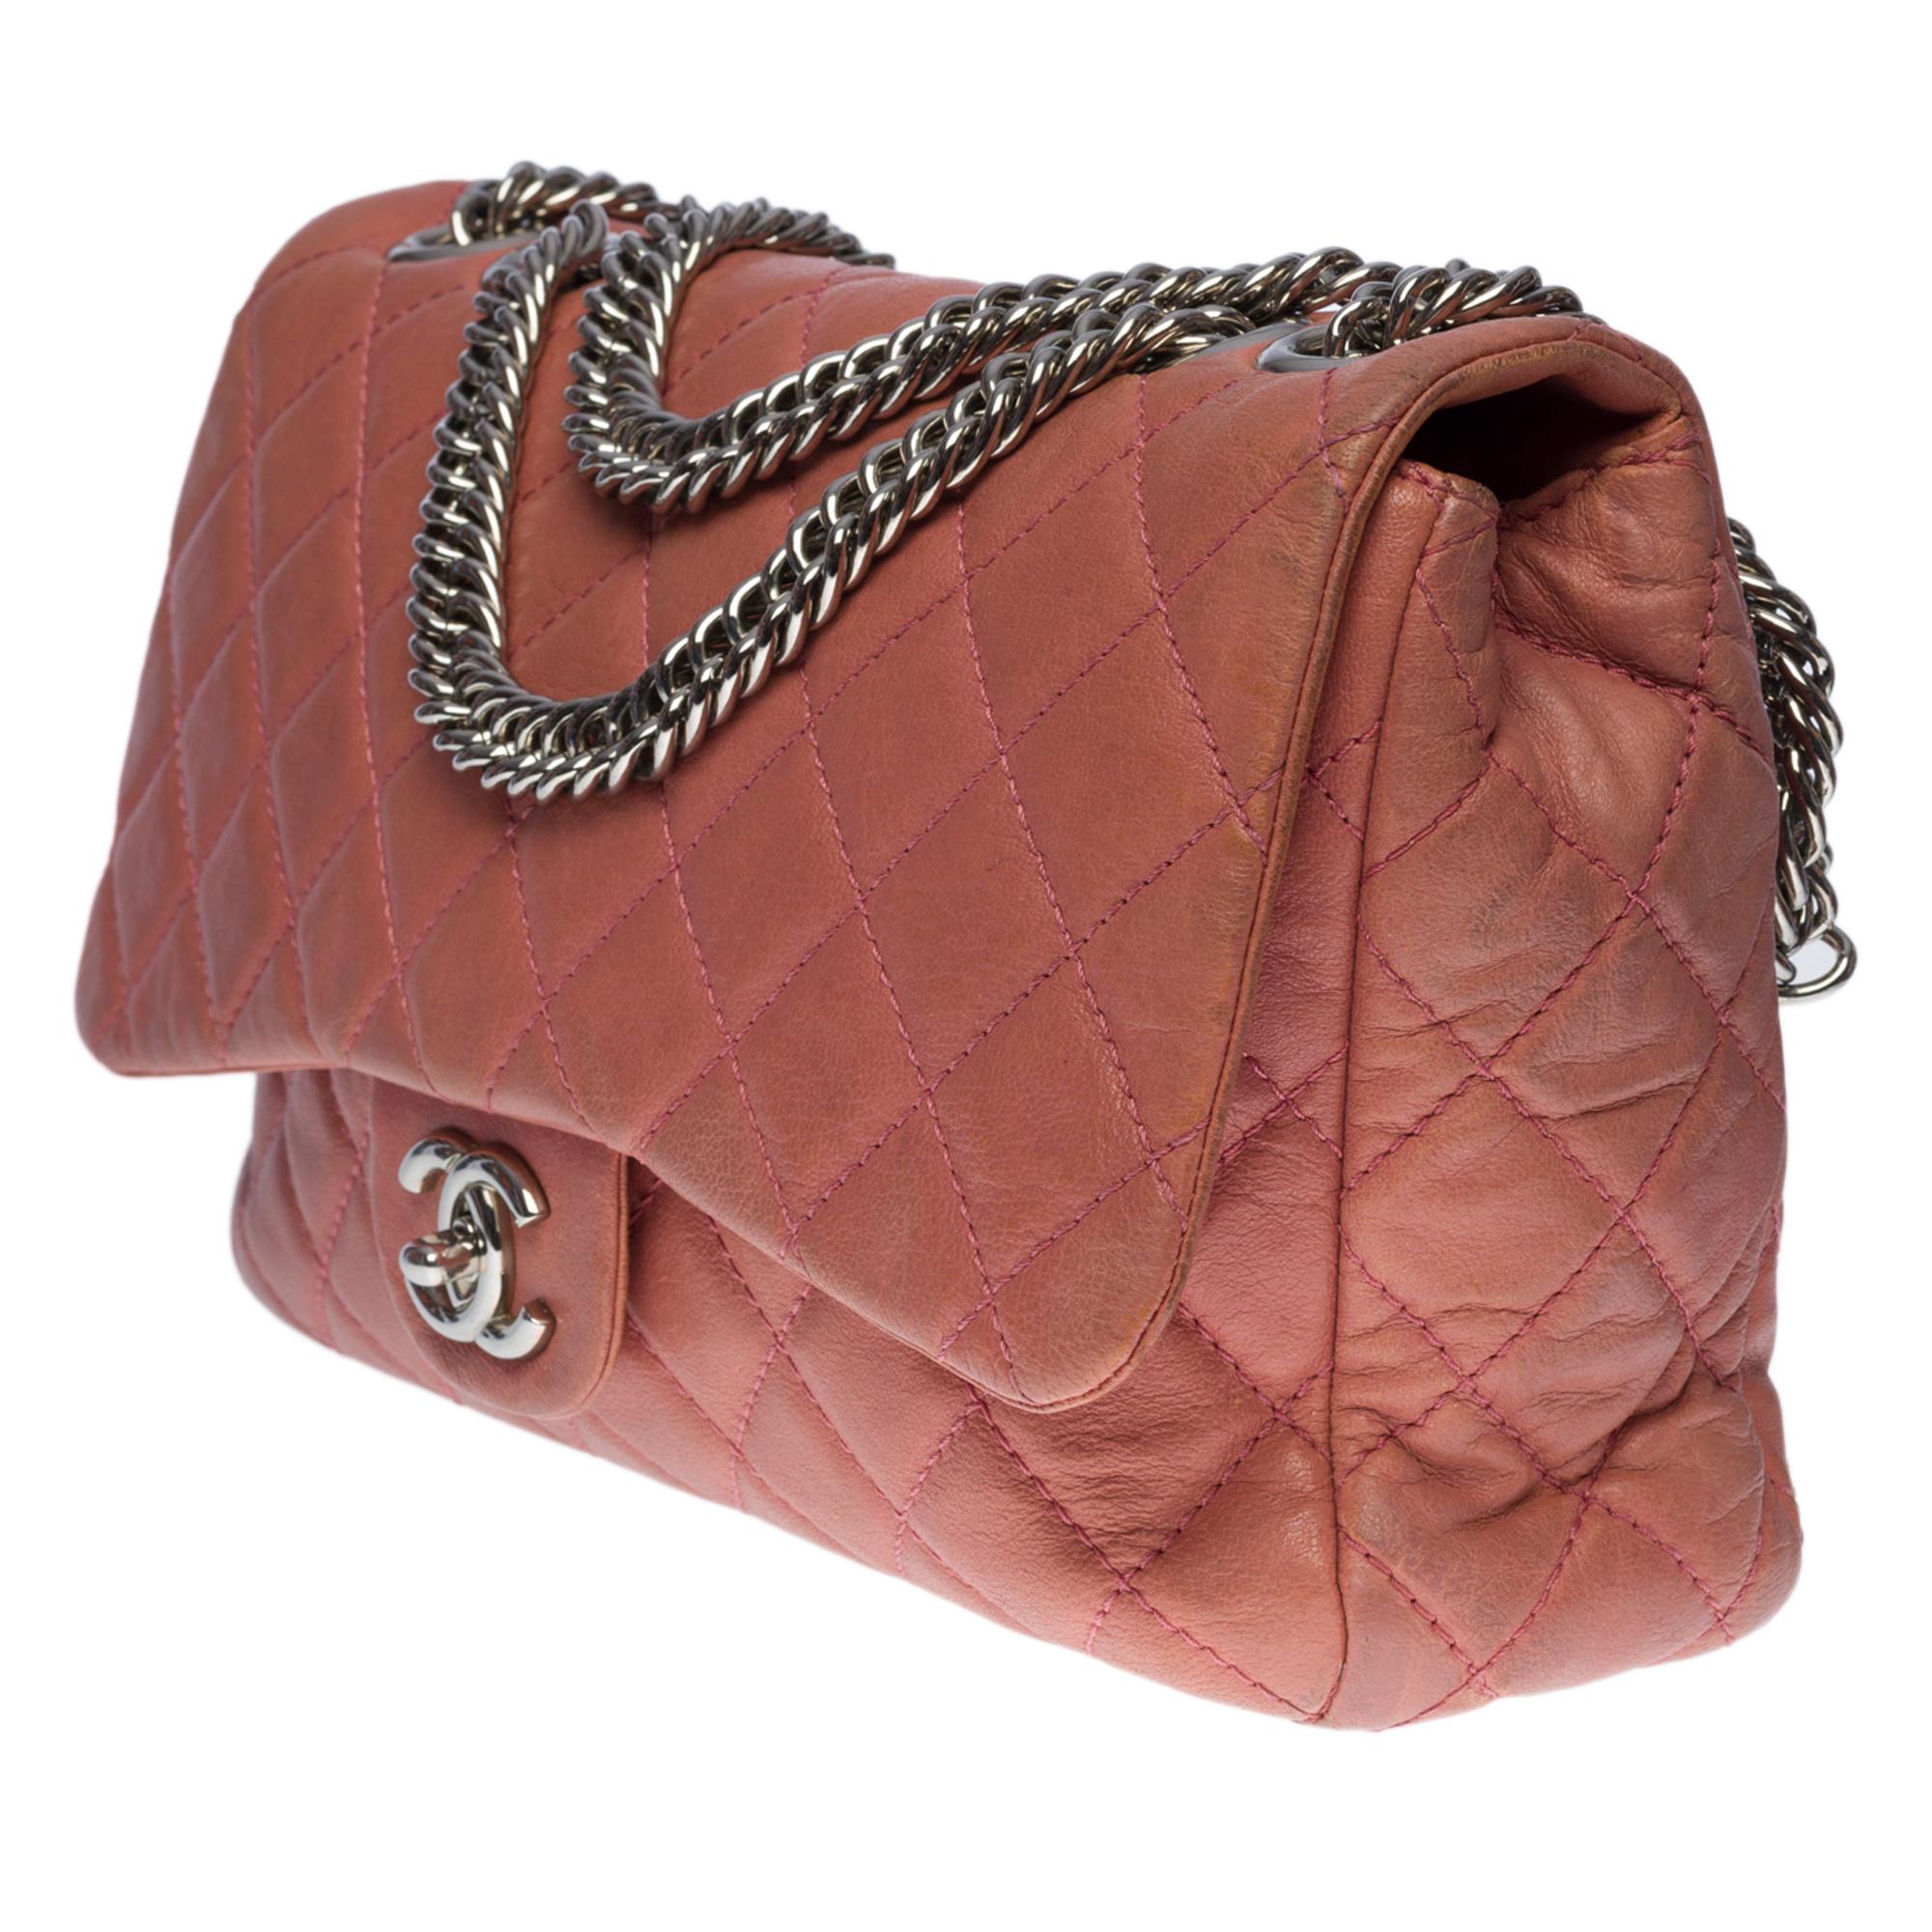  The Chanel Timeless/Classique Jumbo single flap bag handbag in powder pink aged In Excellent Condition For Sale In Paris, IDF